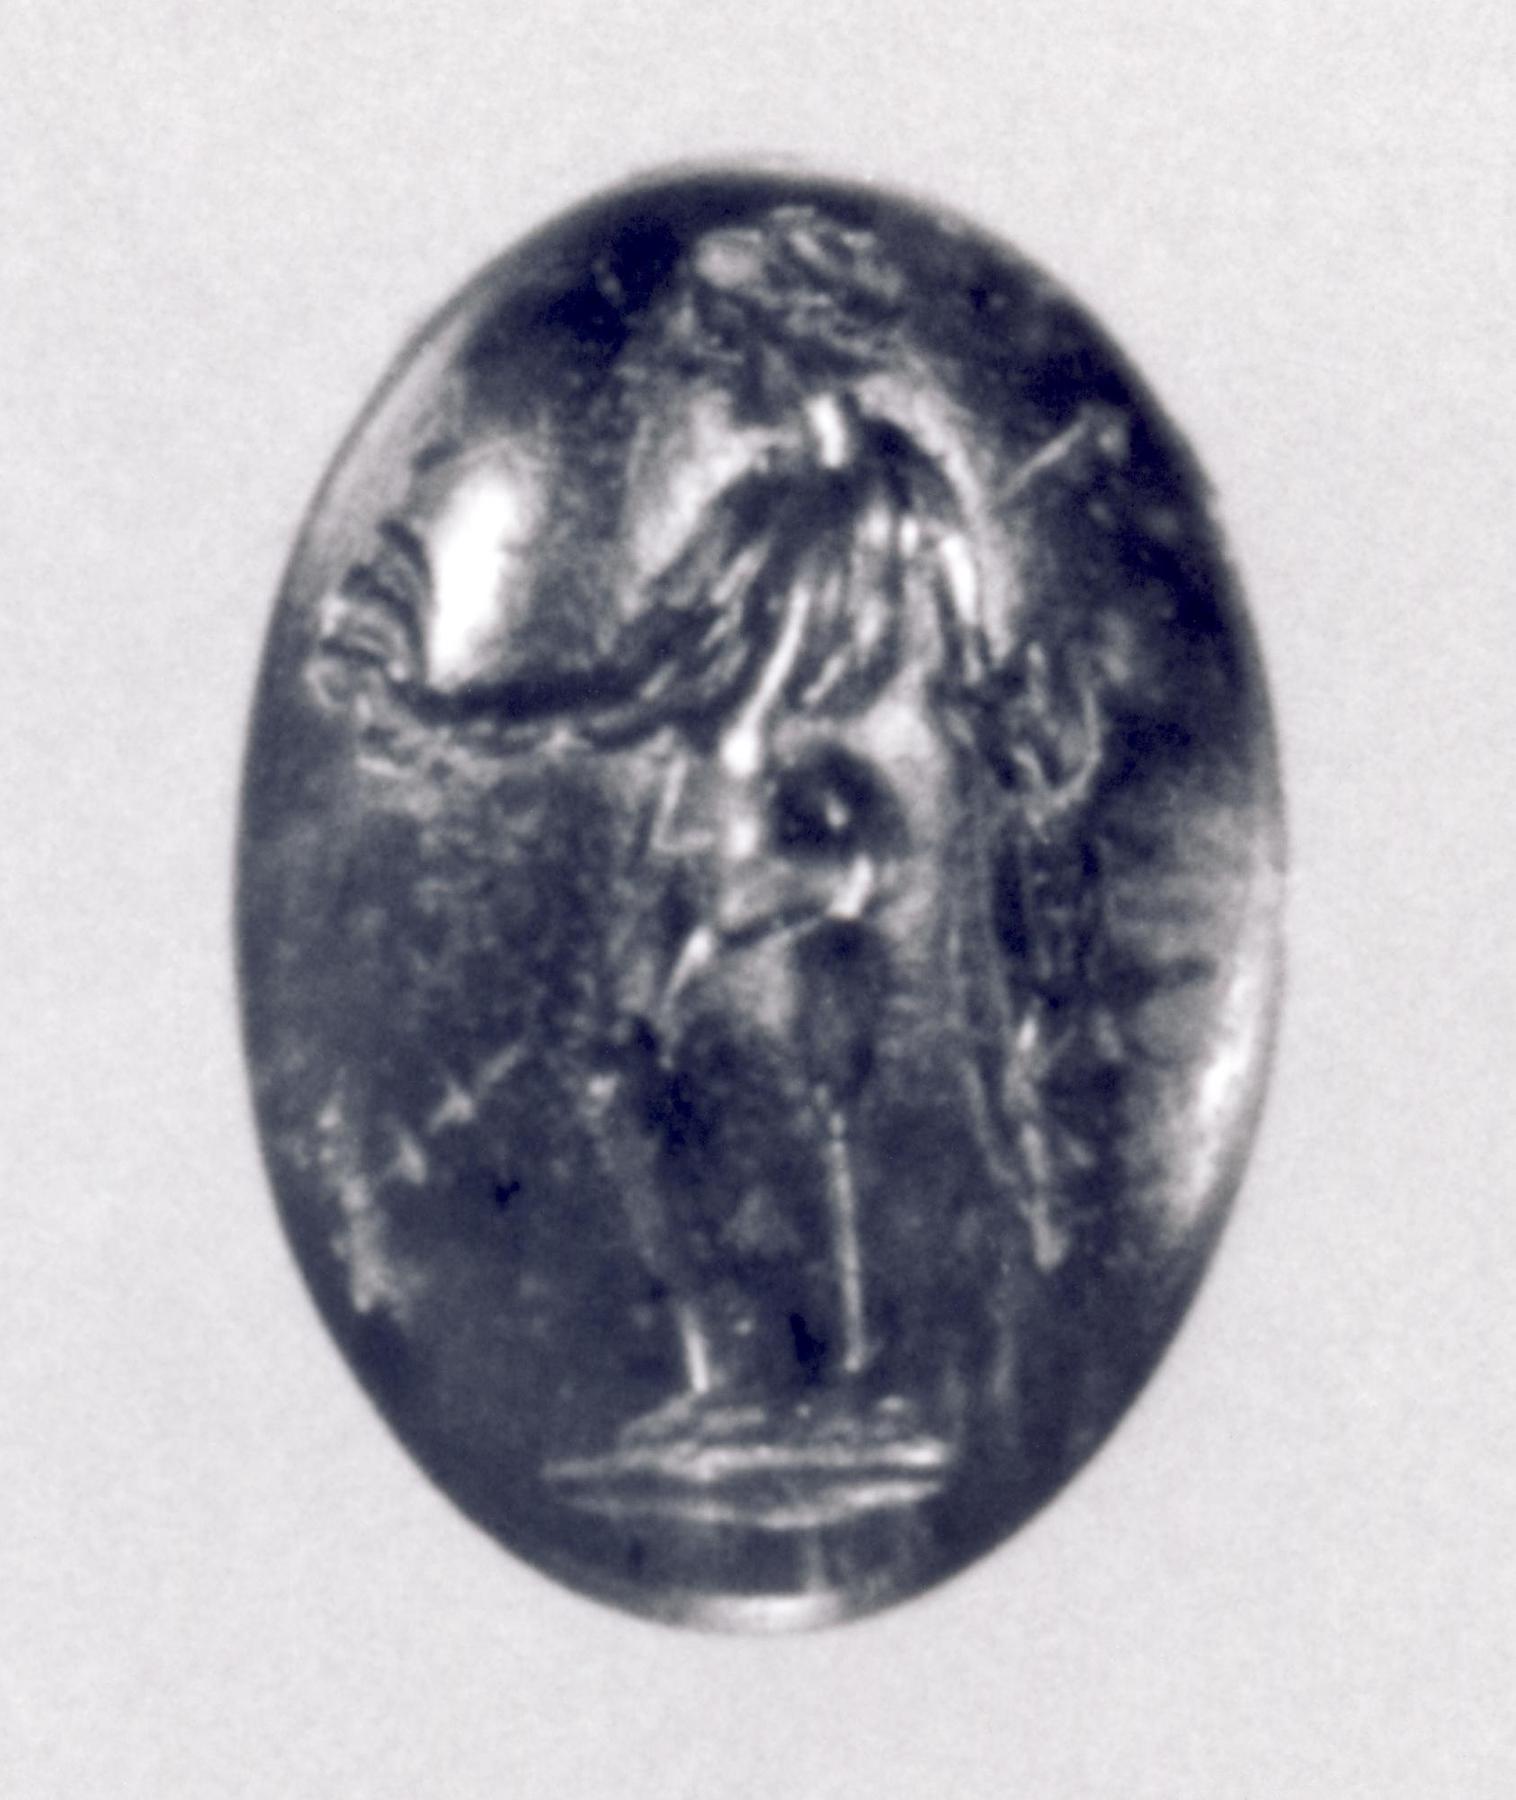 Aphrodite with a ship ornament and scepter, I268